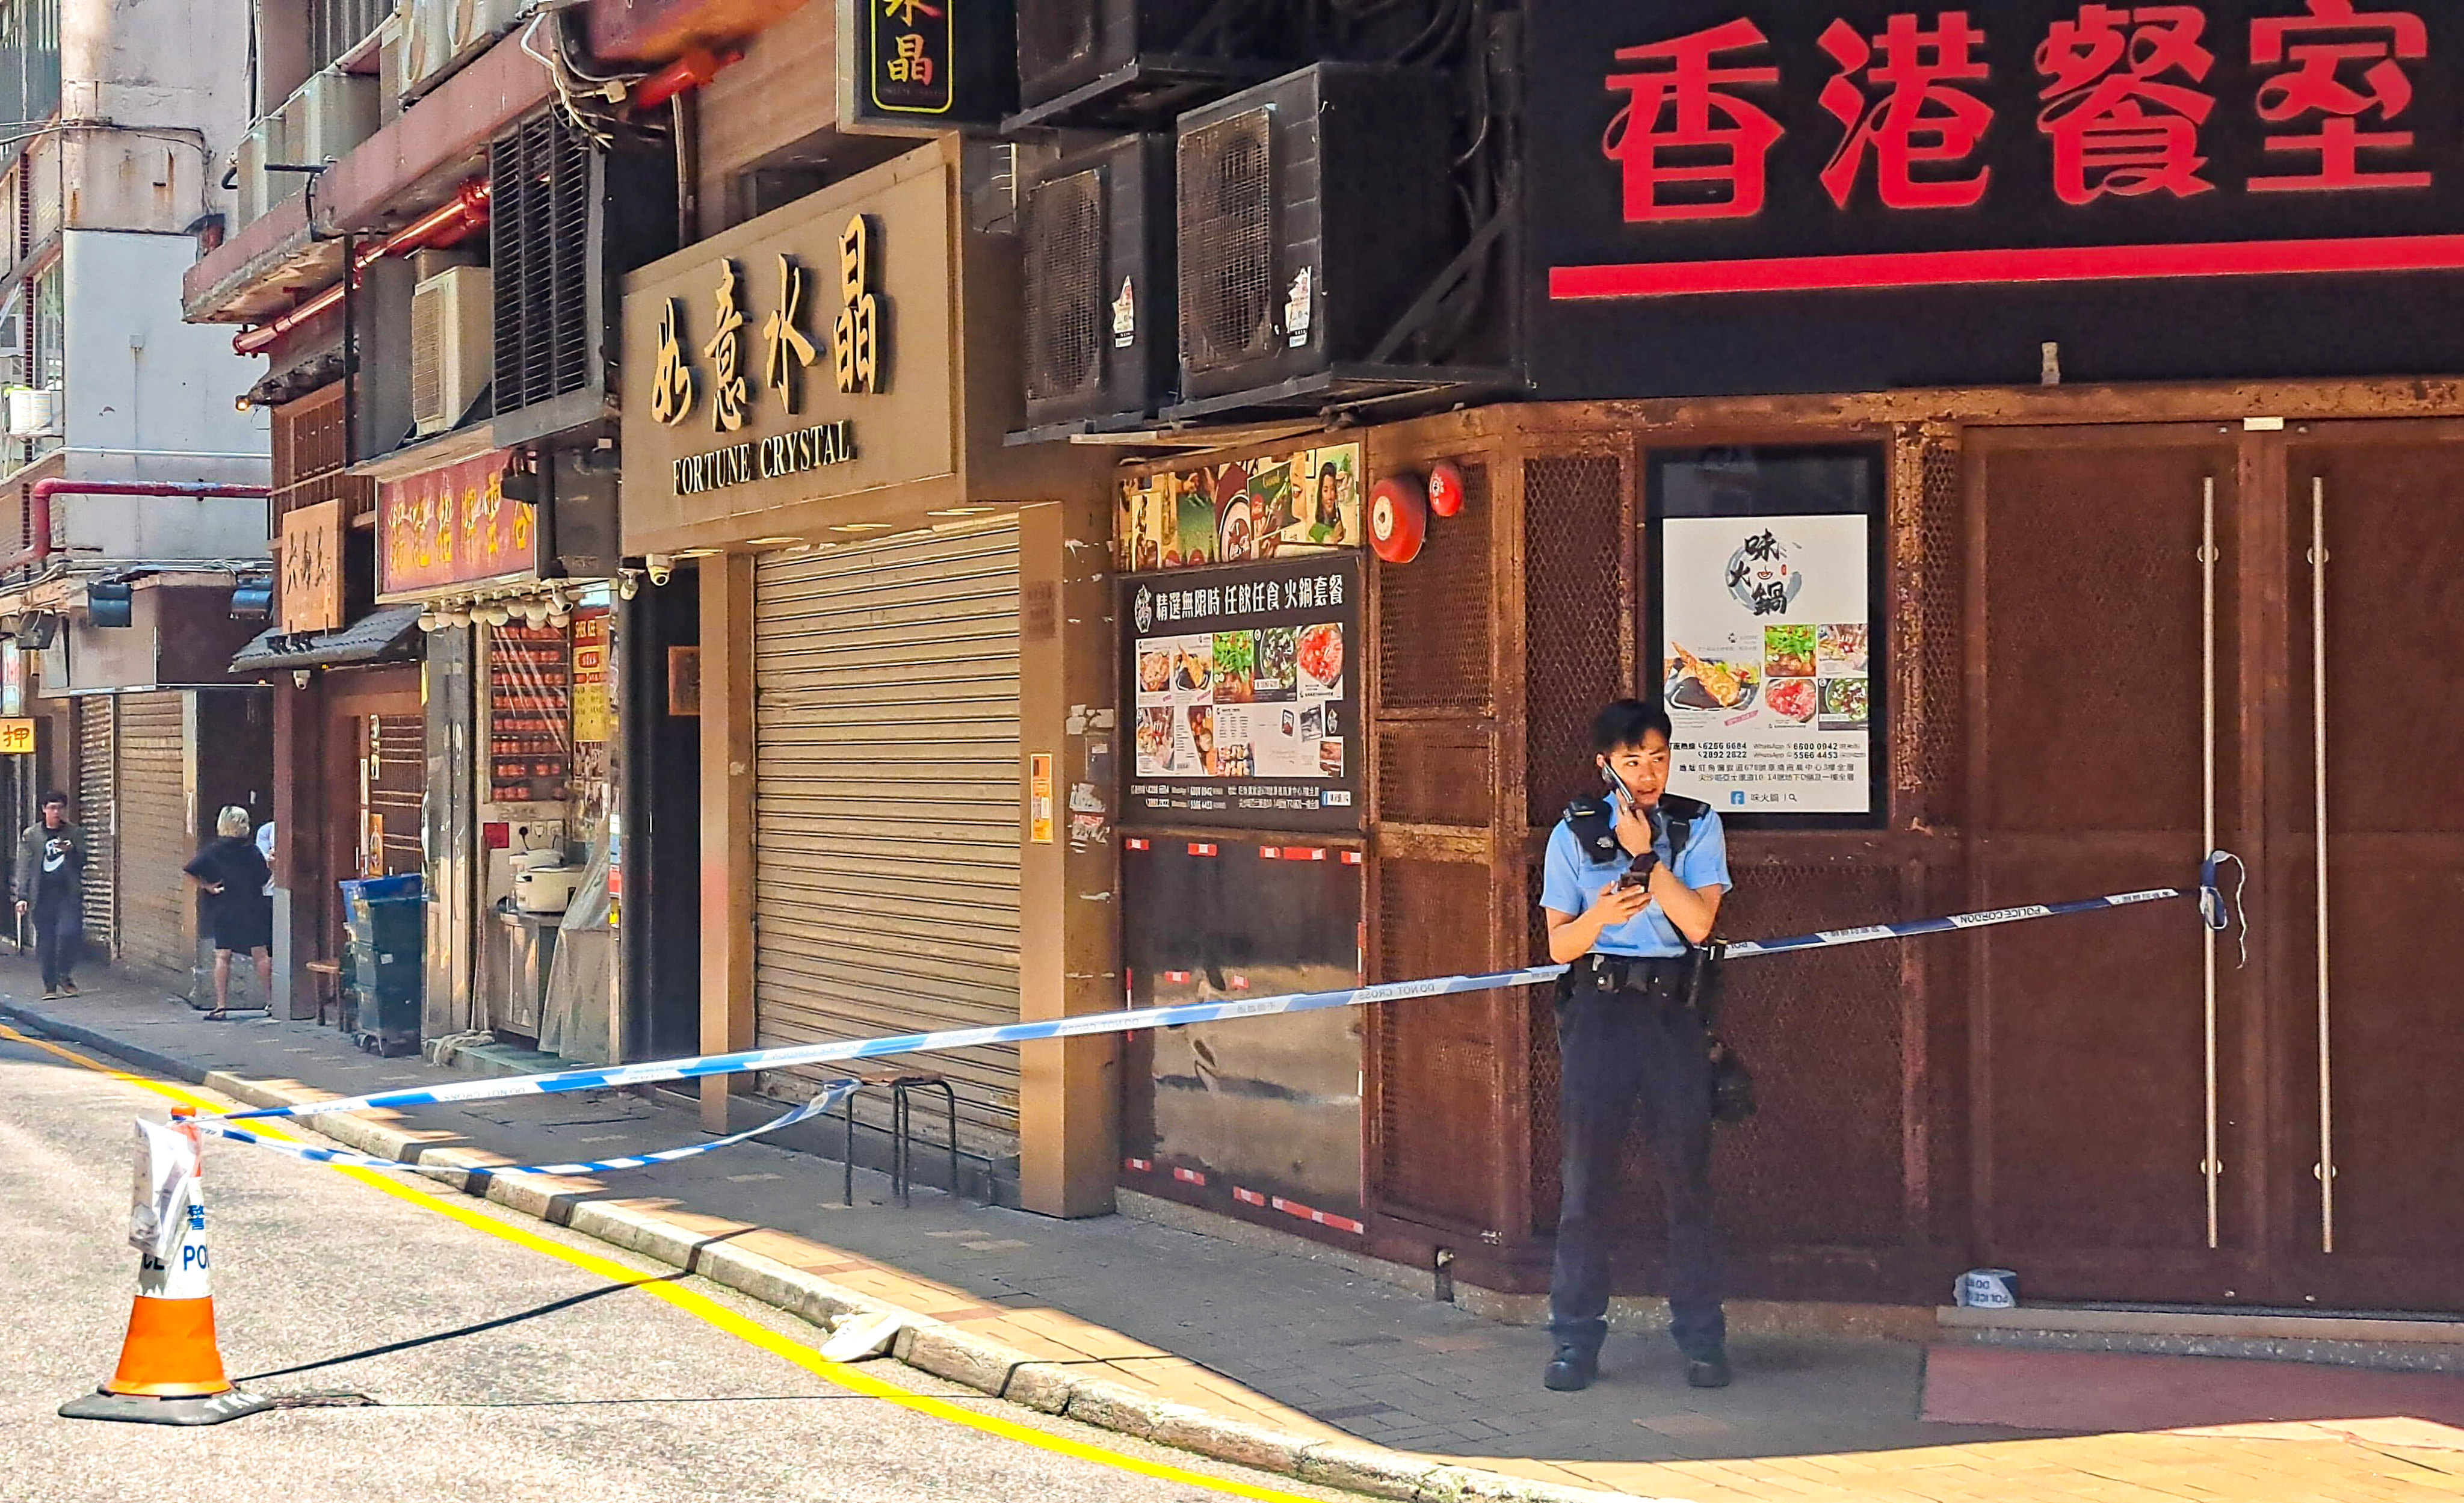 A police officer on duty at the site where a woman was bundled into a car by two men in Tsim Sha Tsui. Photo: Handout